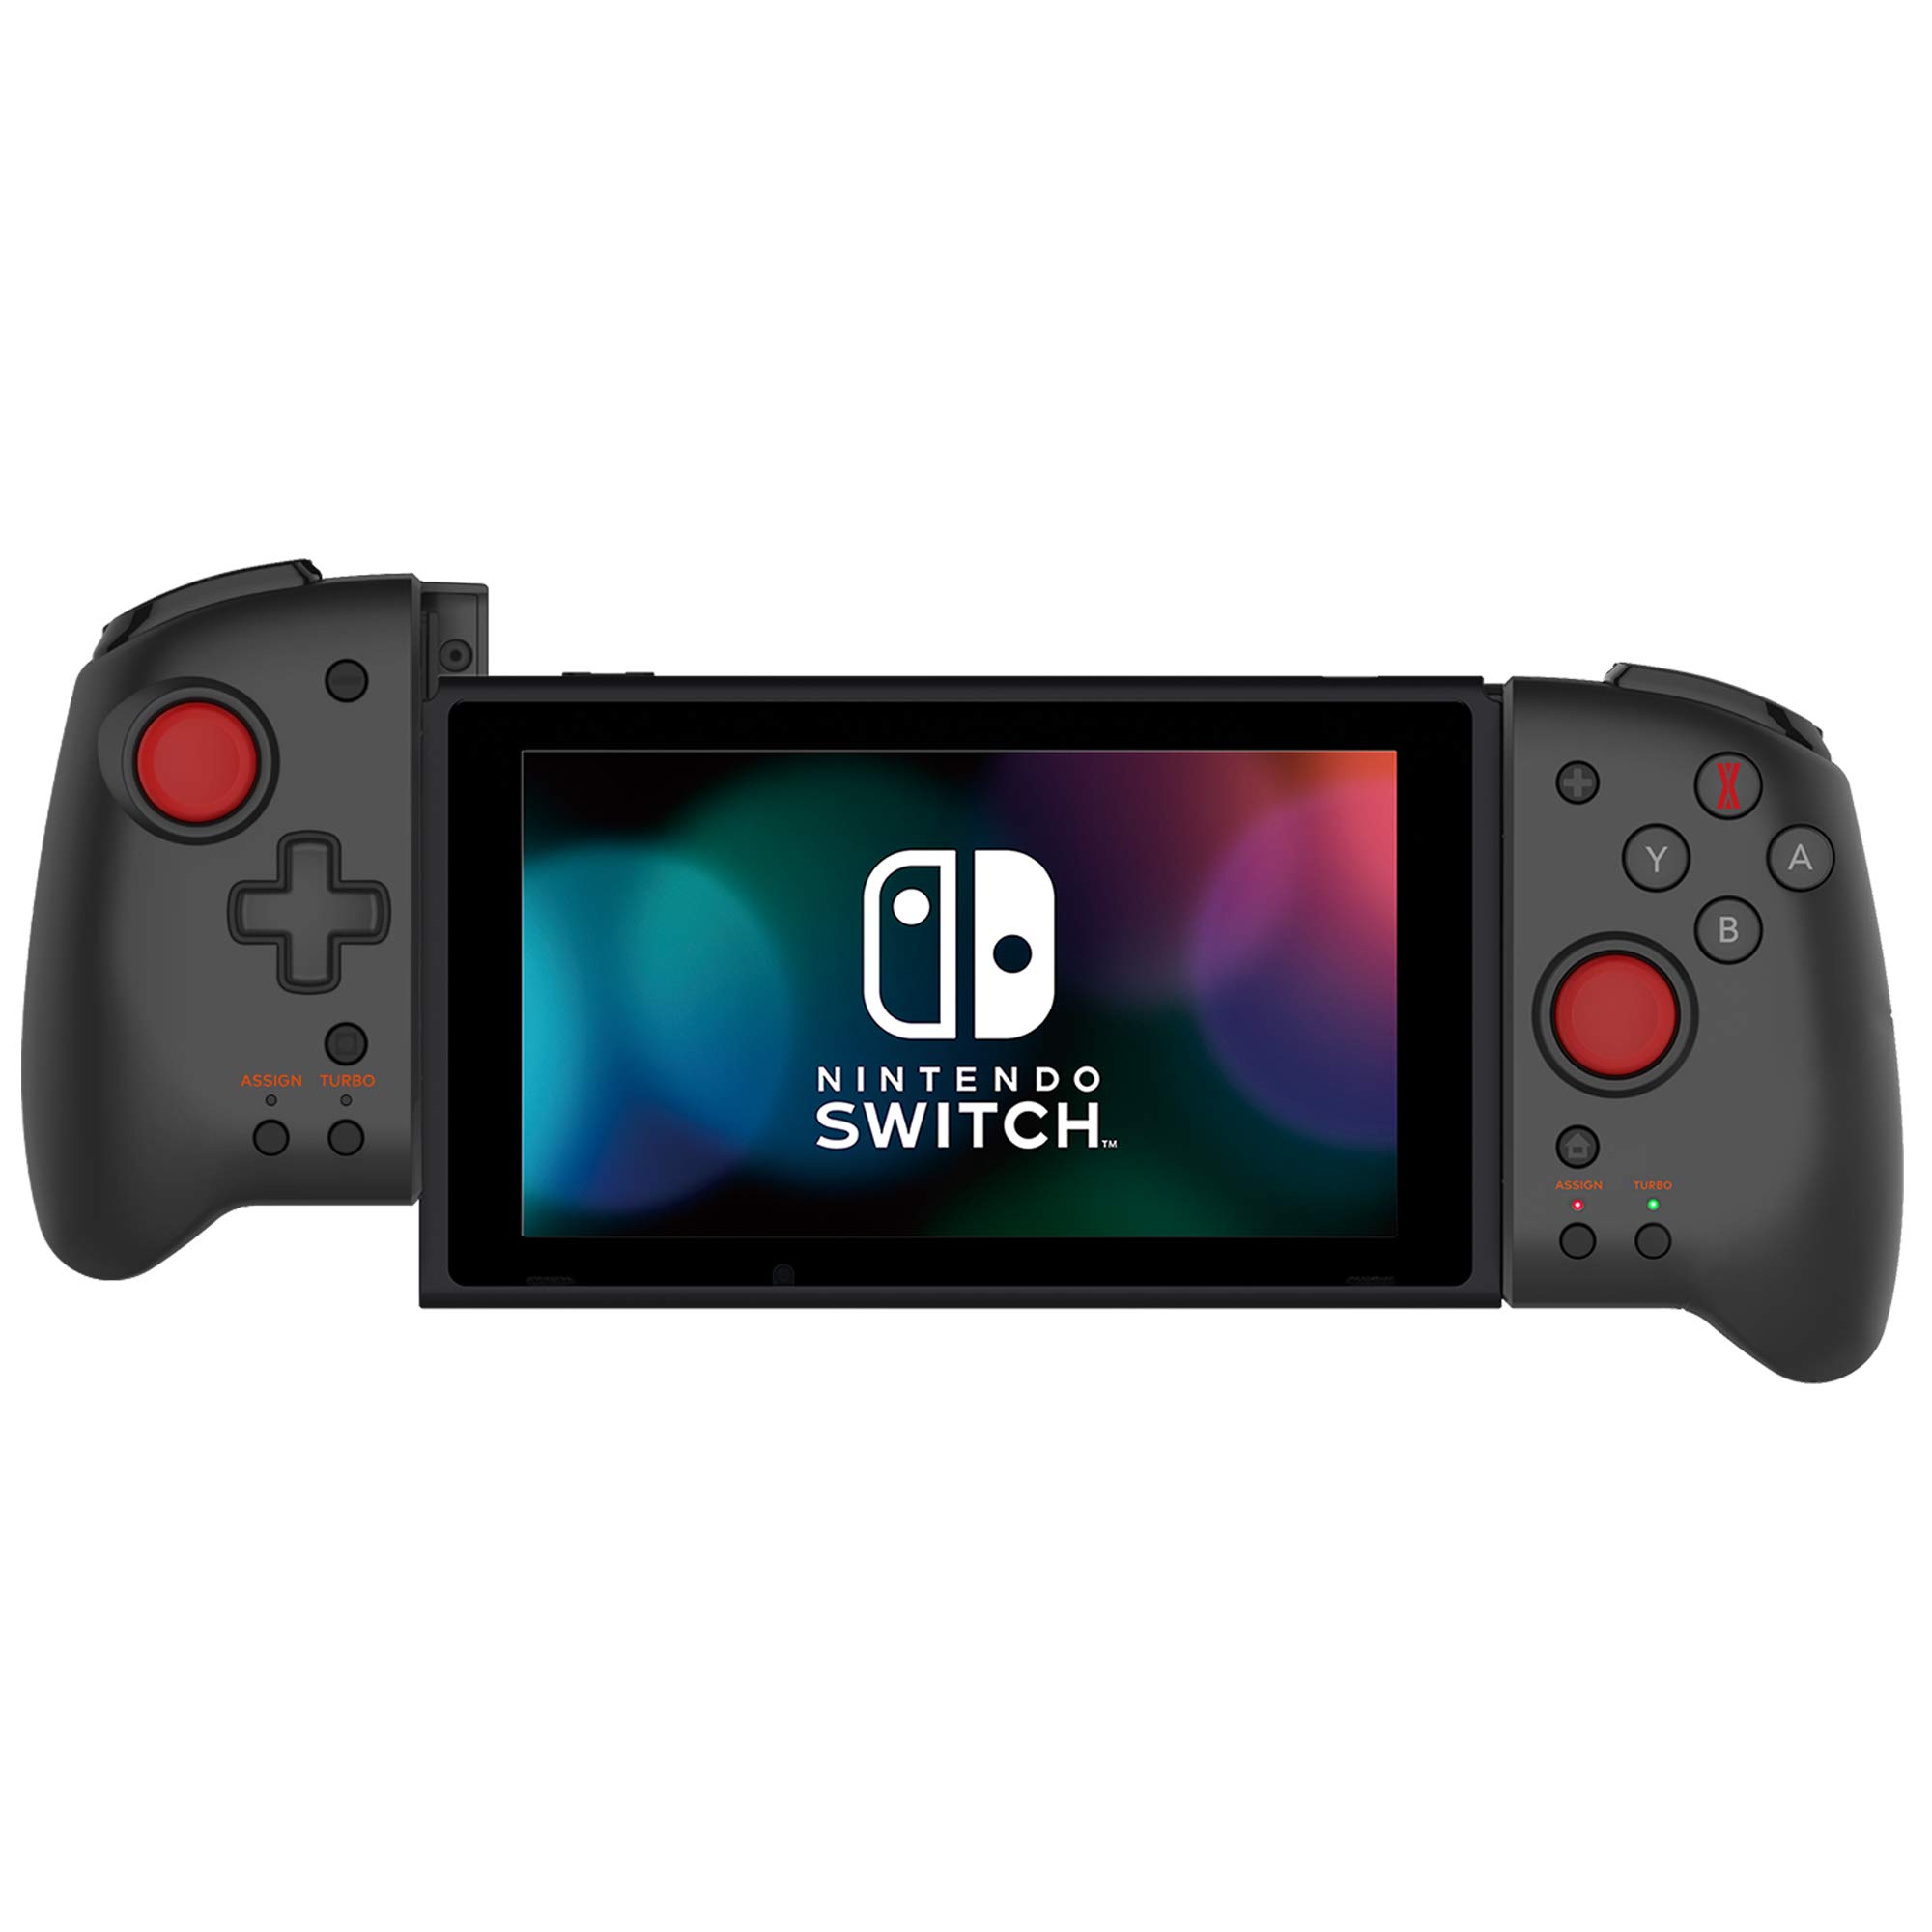 Nintendo Switch Bluetooth Split Pad Pro (Daemon X Machina Edition) Ergonomic Controller for Handheld Mode - Officially Licensed By Nintendo